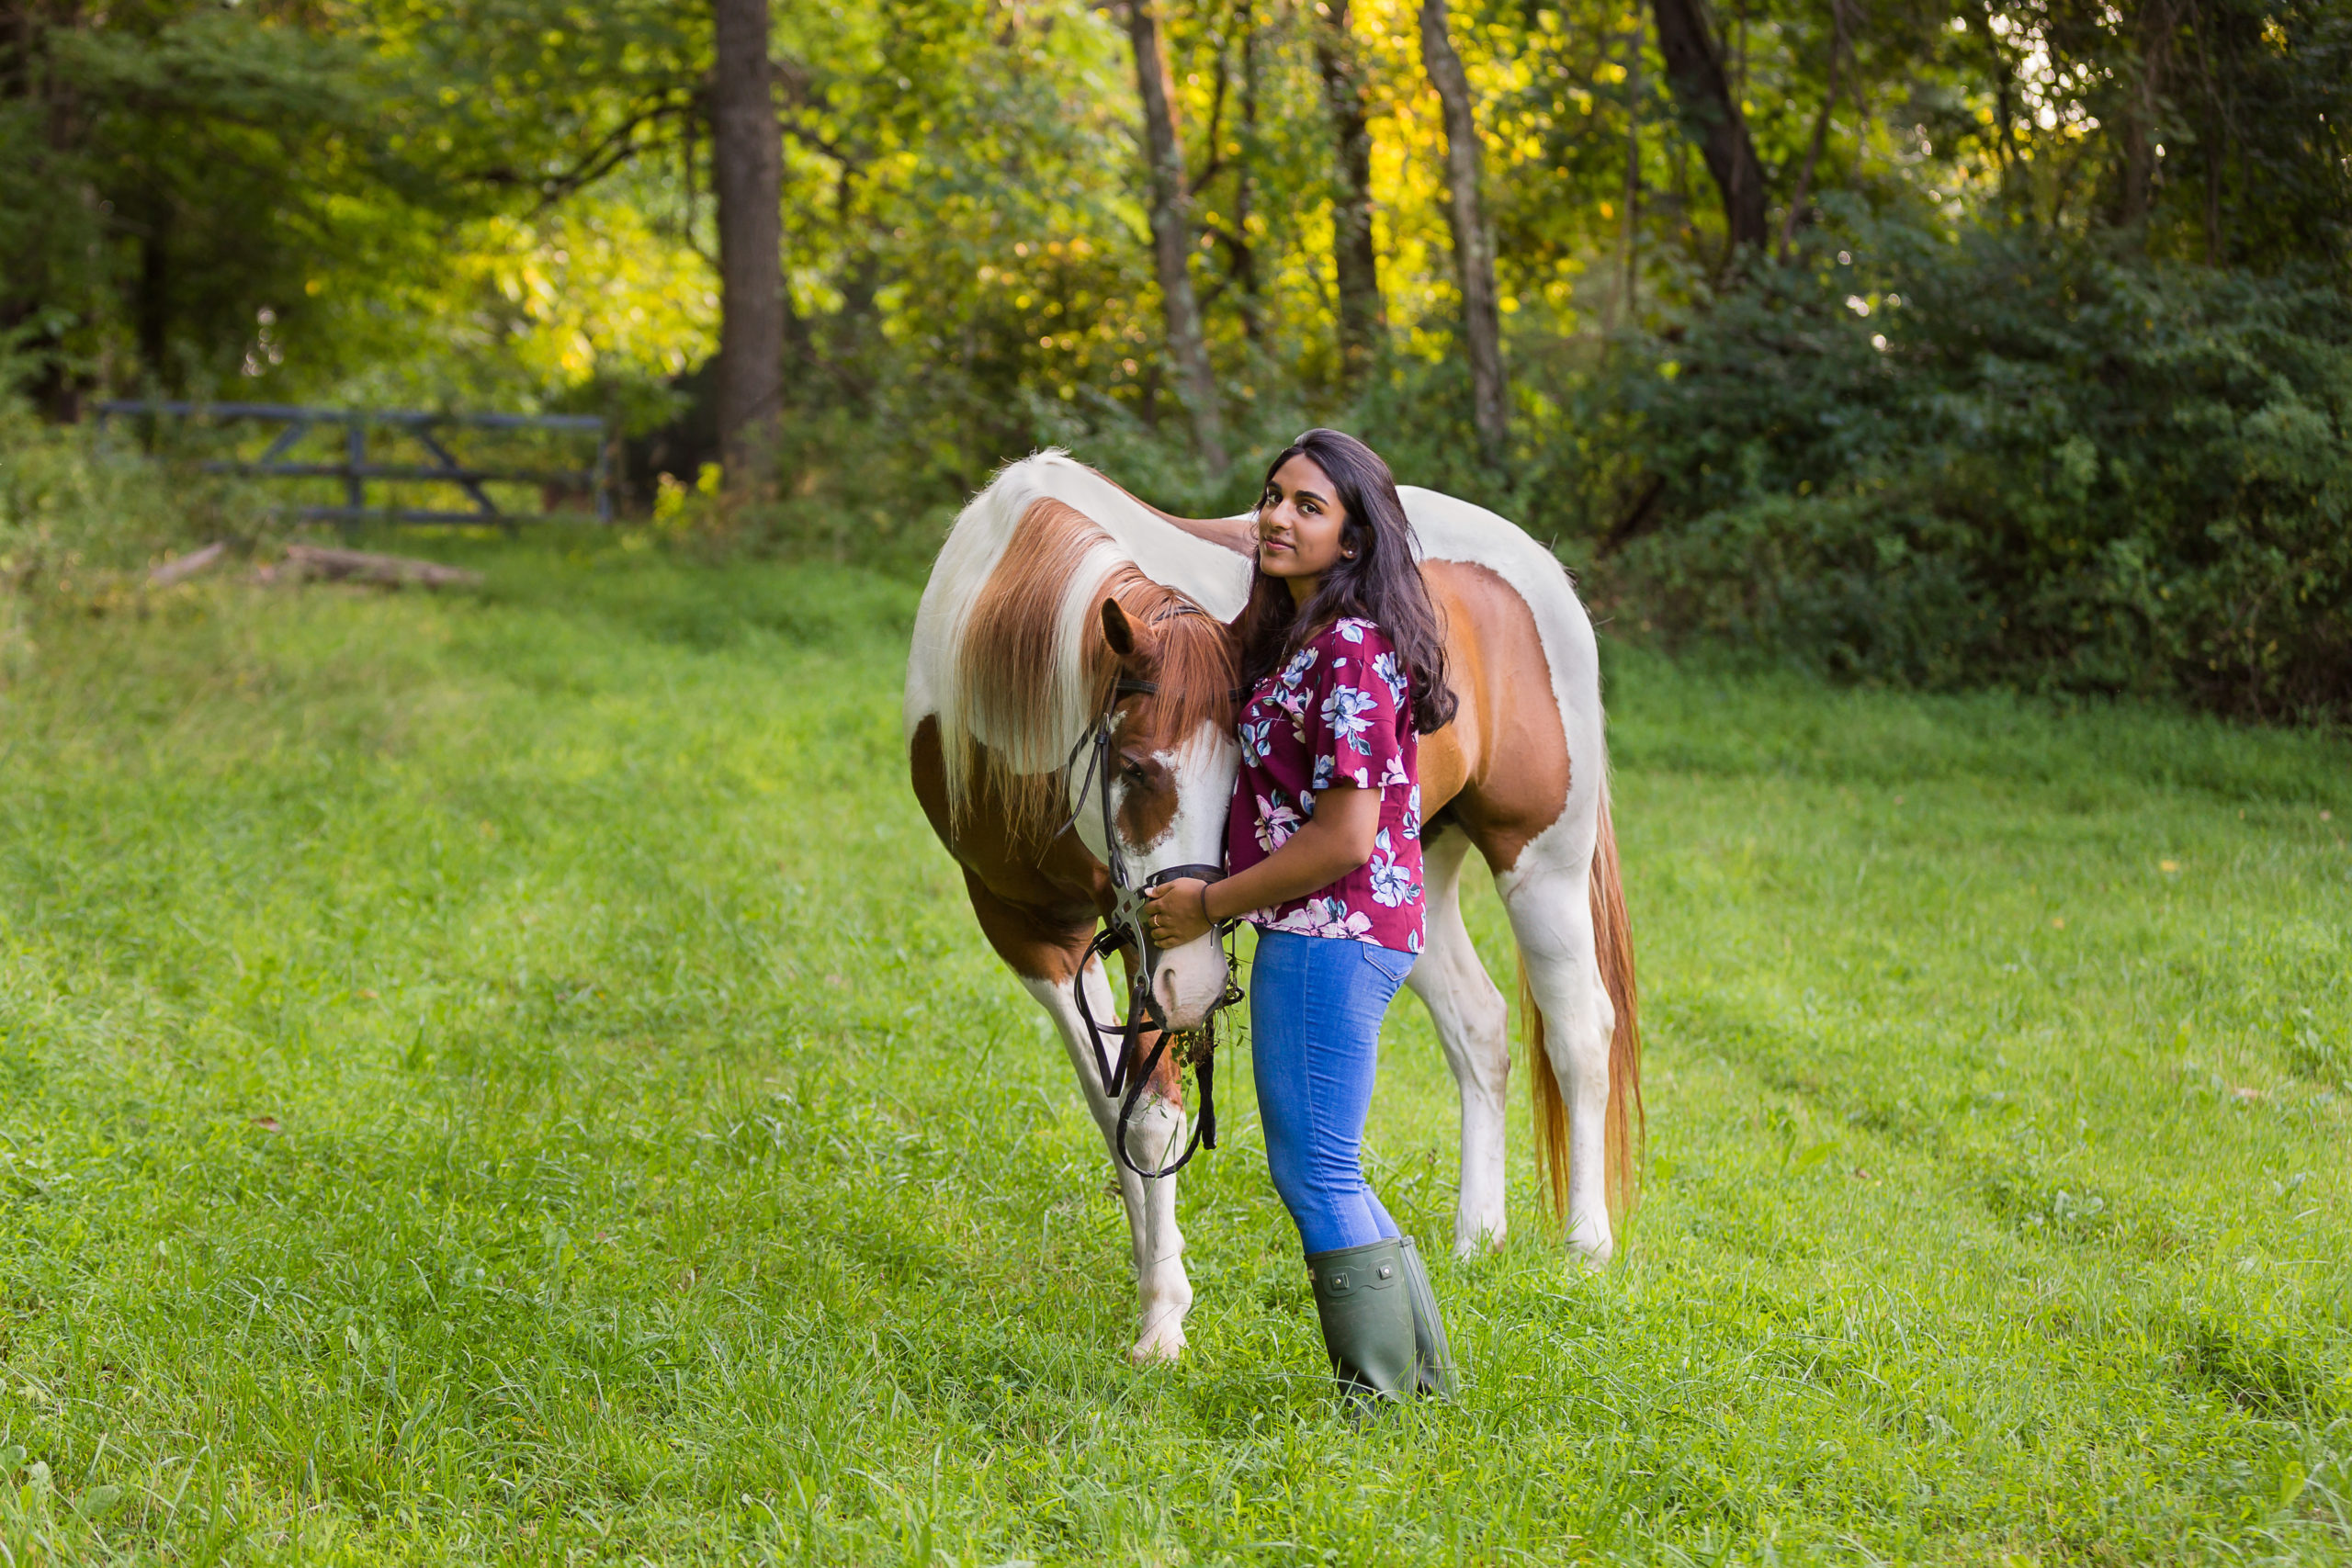 girl with paint horse in grassy field